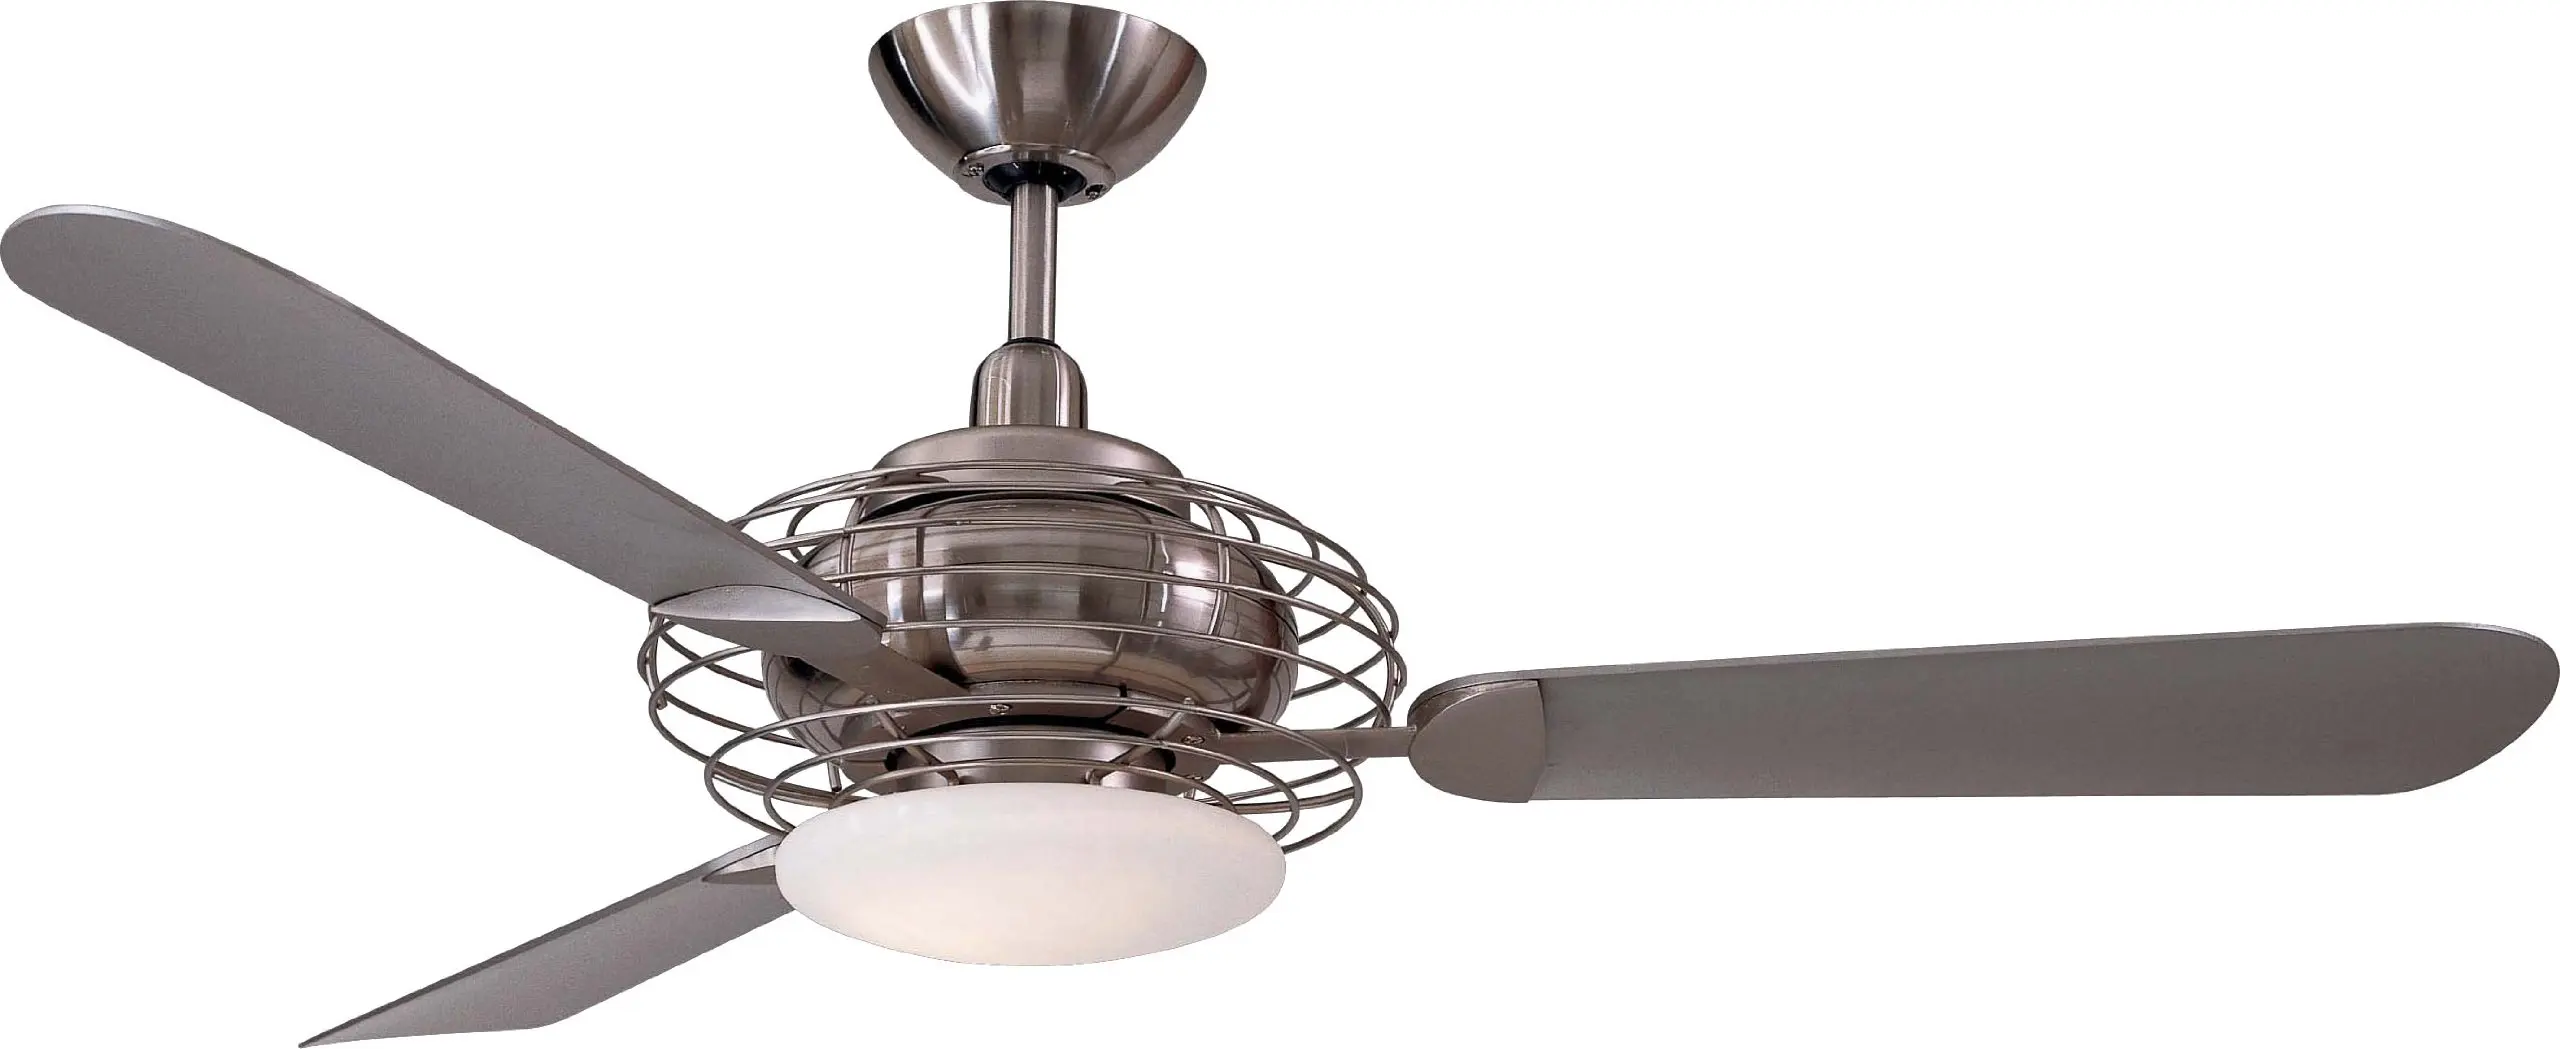 Buy Minka Aire F601 Bs Bn Acero 52 Ceiling Fan With Light